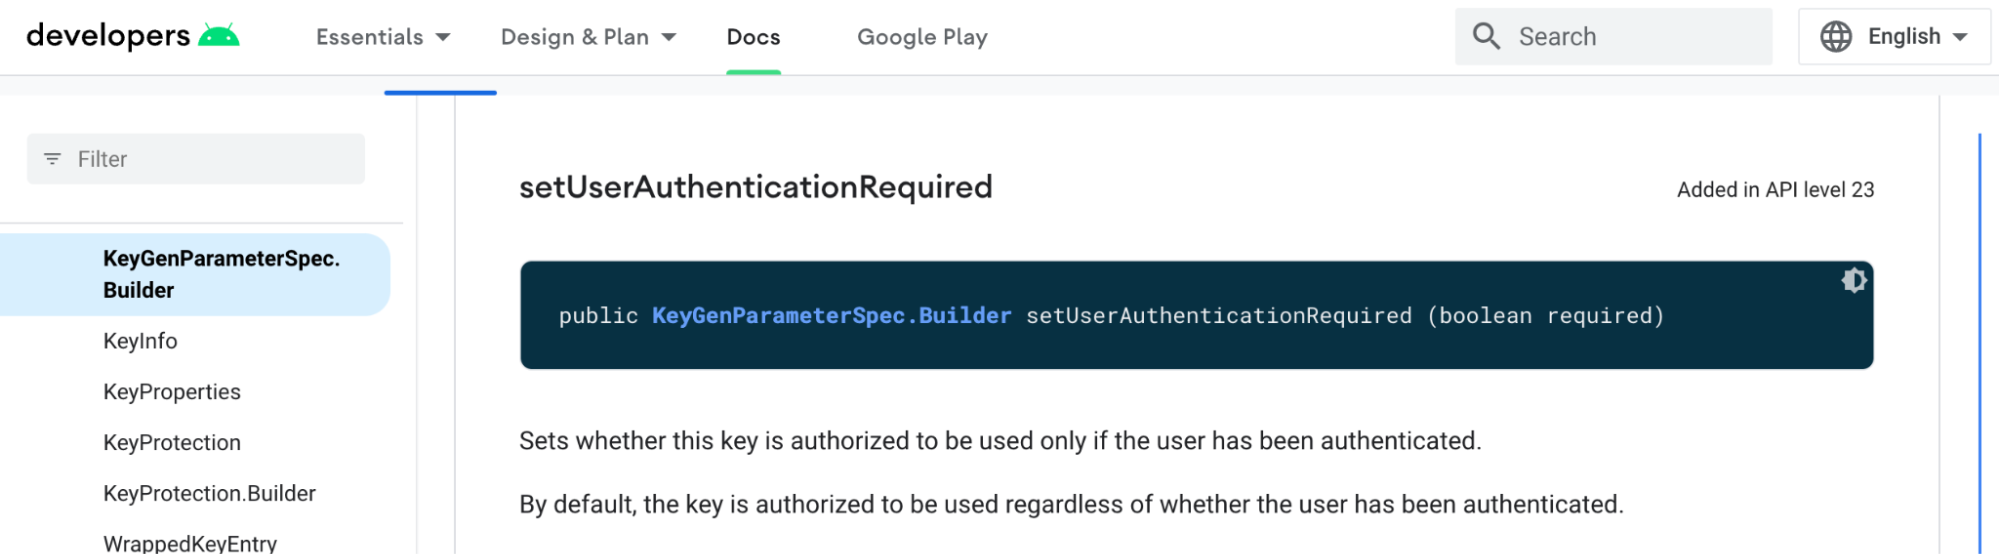 Android Keystore docs for KeyGenerator and UserAuthenticationRequired